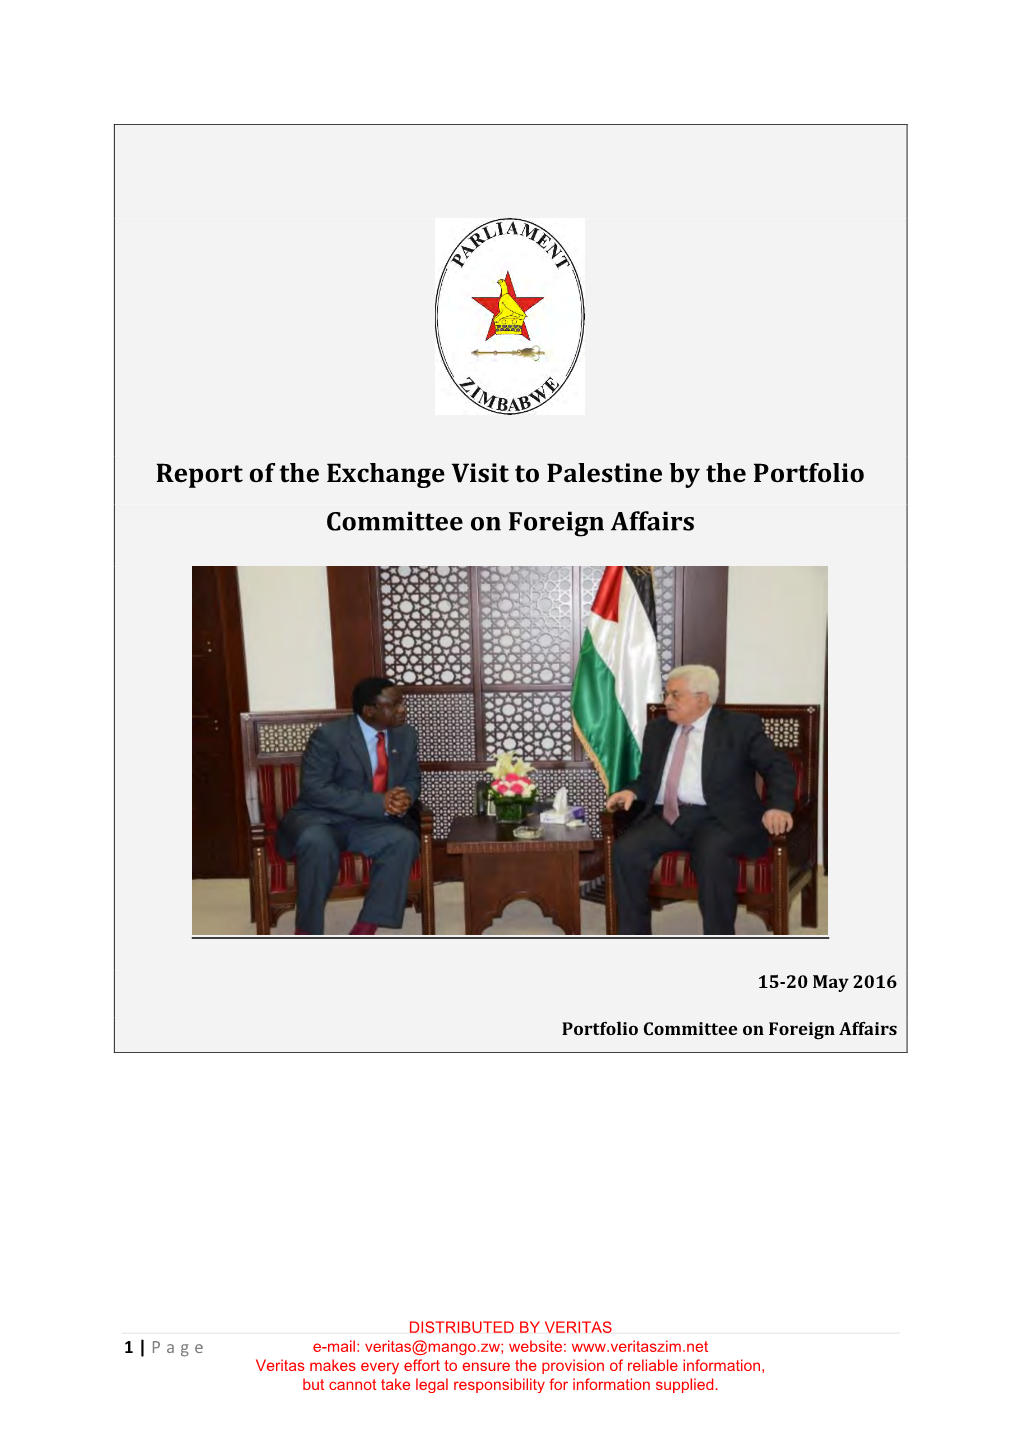 Report of the Exchange Visit to Palestine by the Portfolio Committee on Foreign Affairs